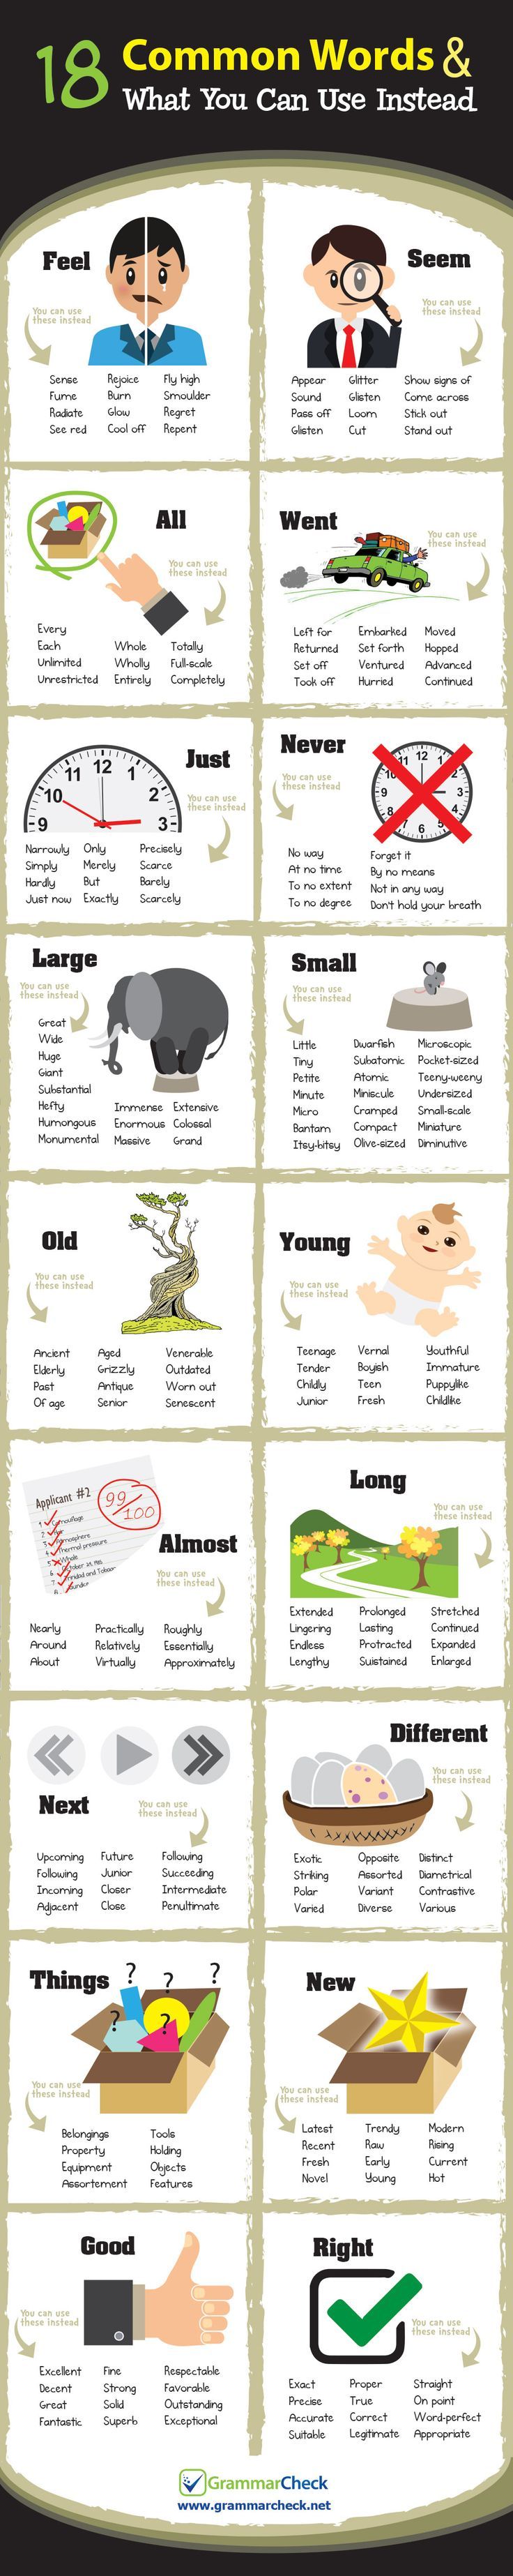 Writing Infographic: 18 Common Words and What You Can Use Instead